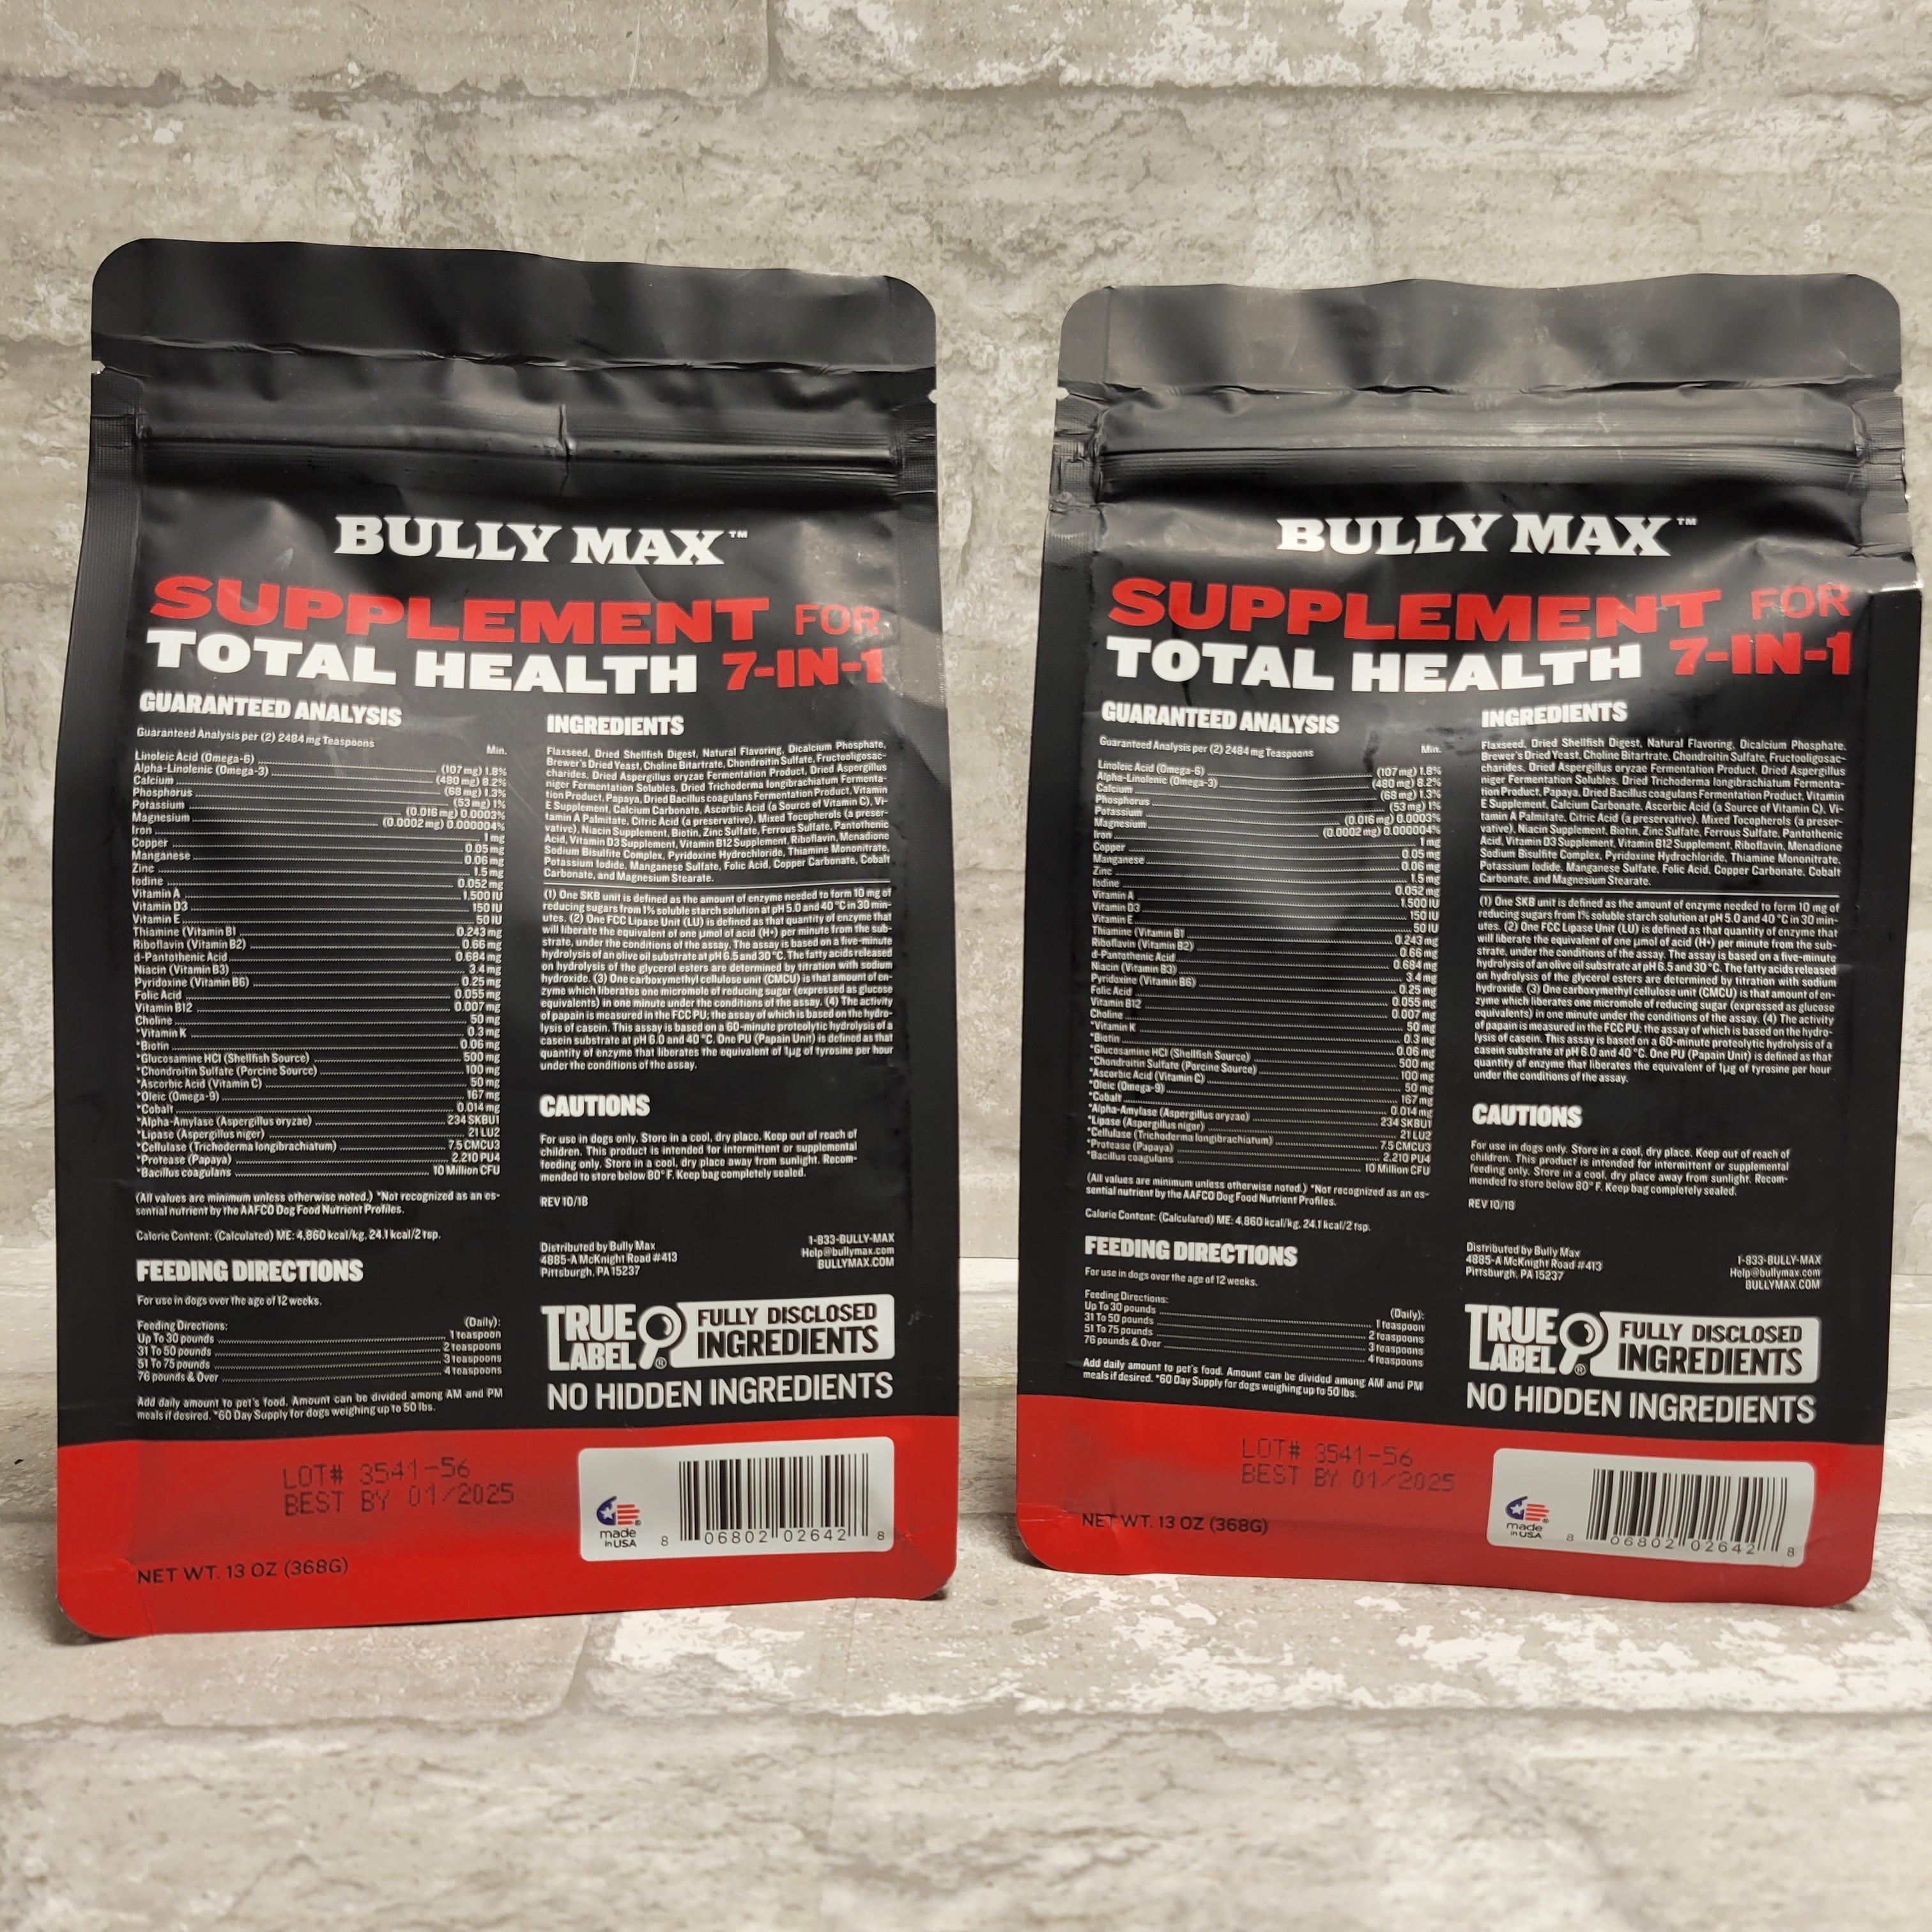 Bully Max Supplement for Total Health 7-IN-1 13oz, Lot of 2 (8045141098734)